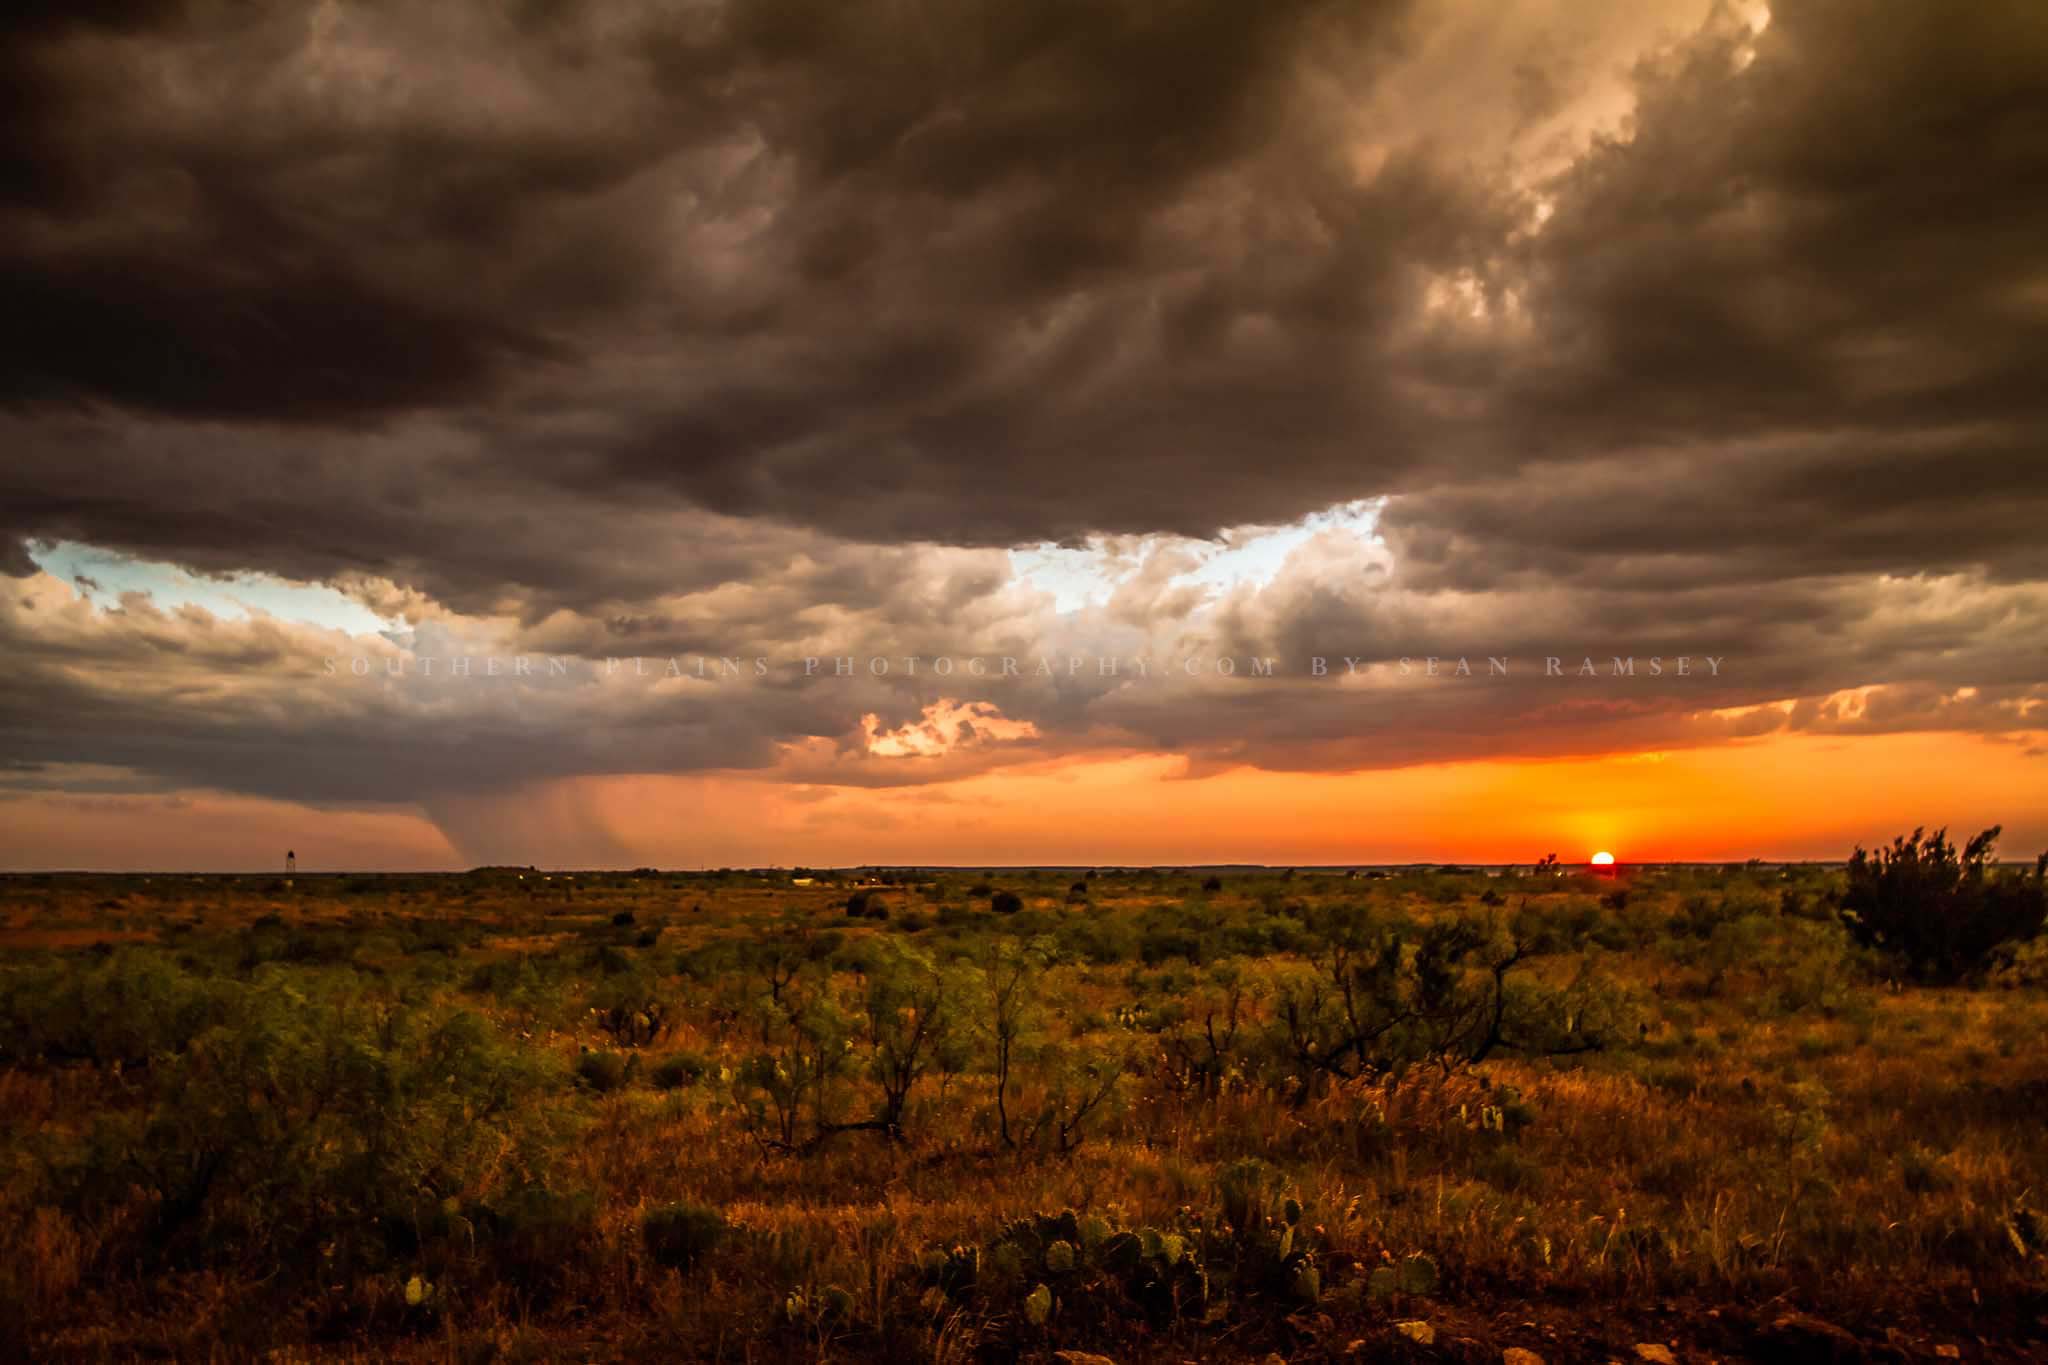 Western landscape photography print of a warm sunset over cactus and mesquite bushes on a stormy evening in West Texas by Sean Ramsey of Southern Plains Photography.